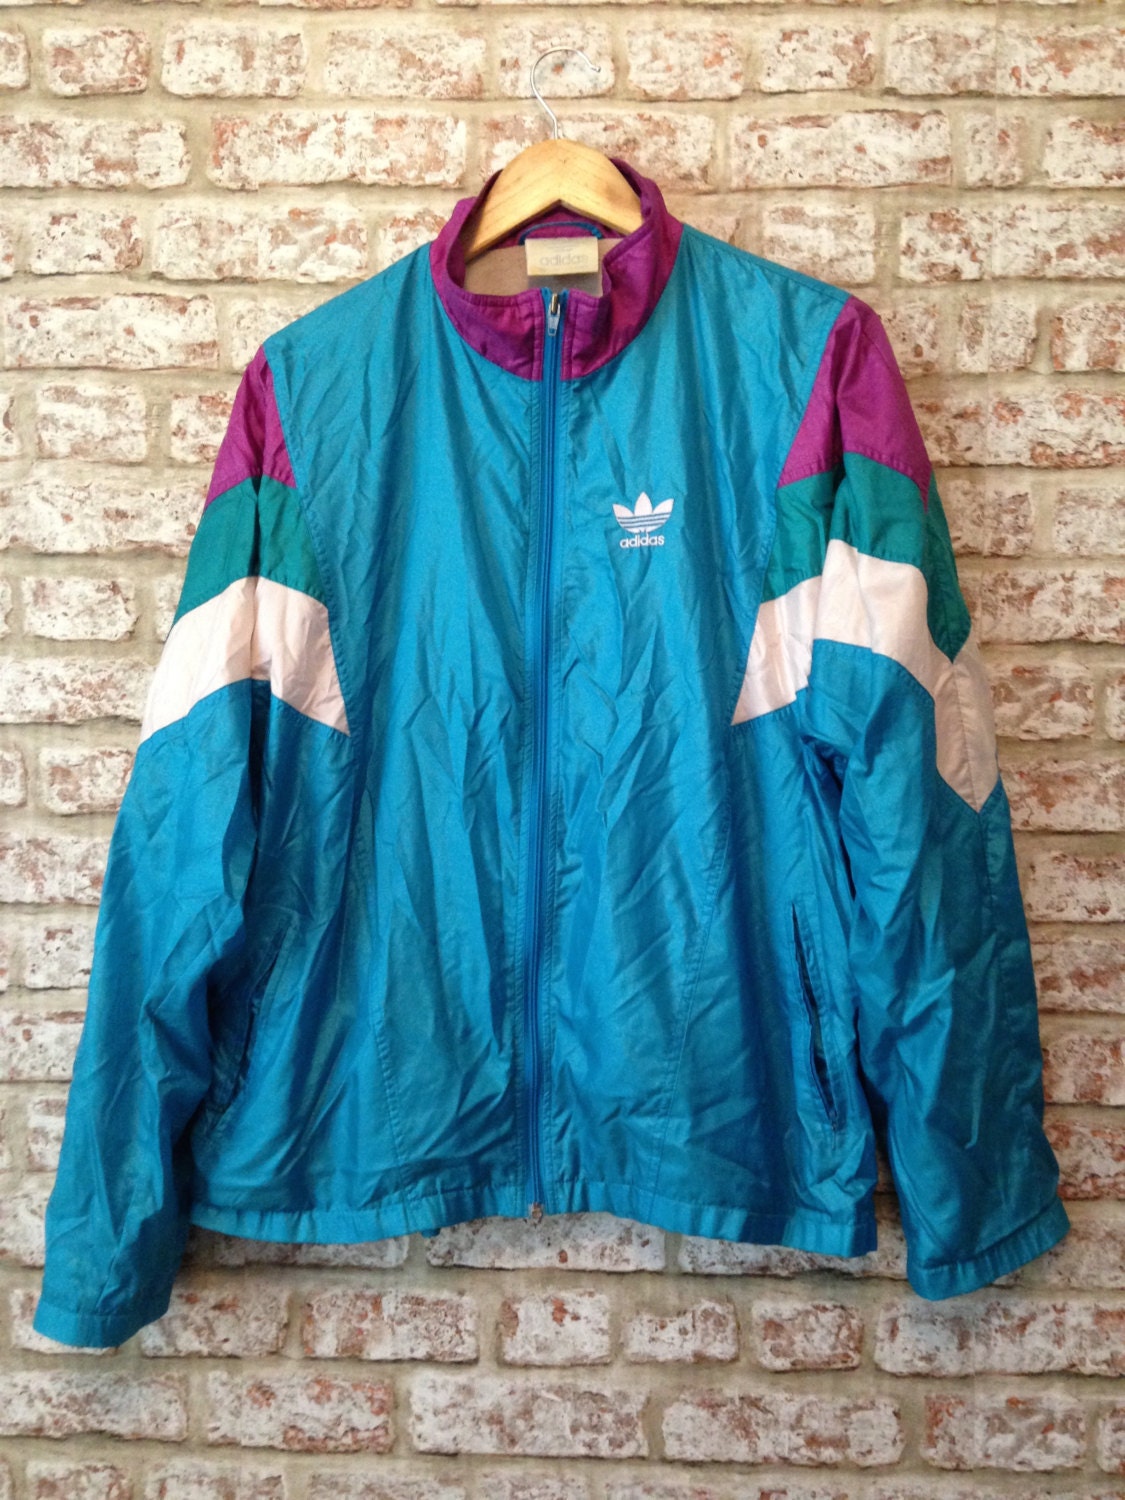 Adidas Vintage Festival 80s/90s Shell Suit Jacket funky